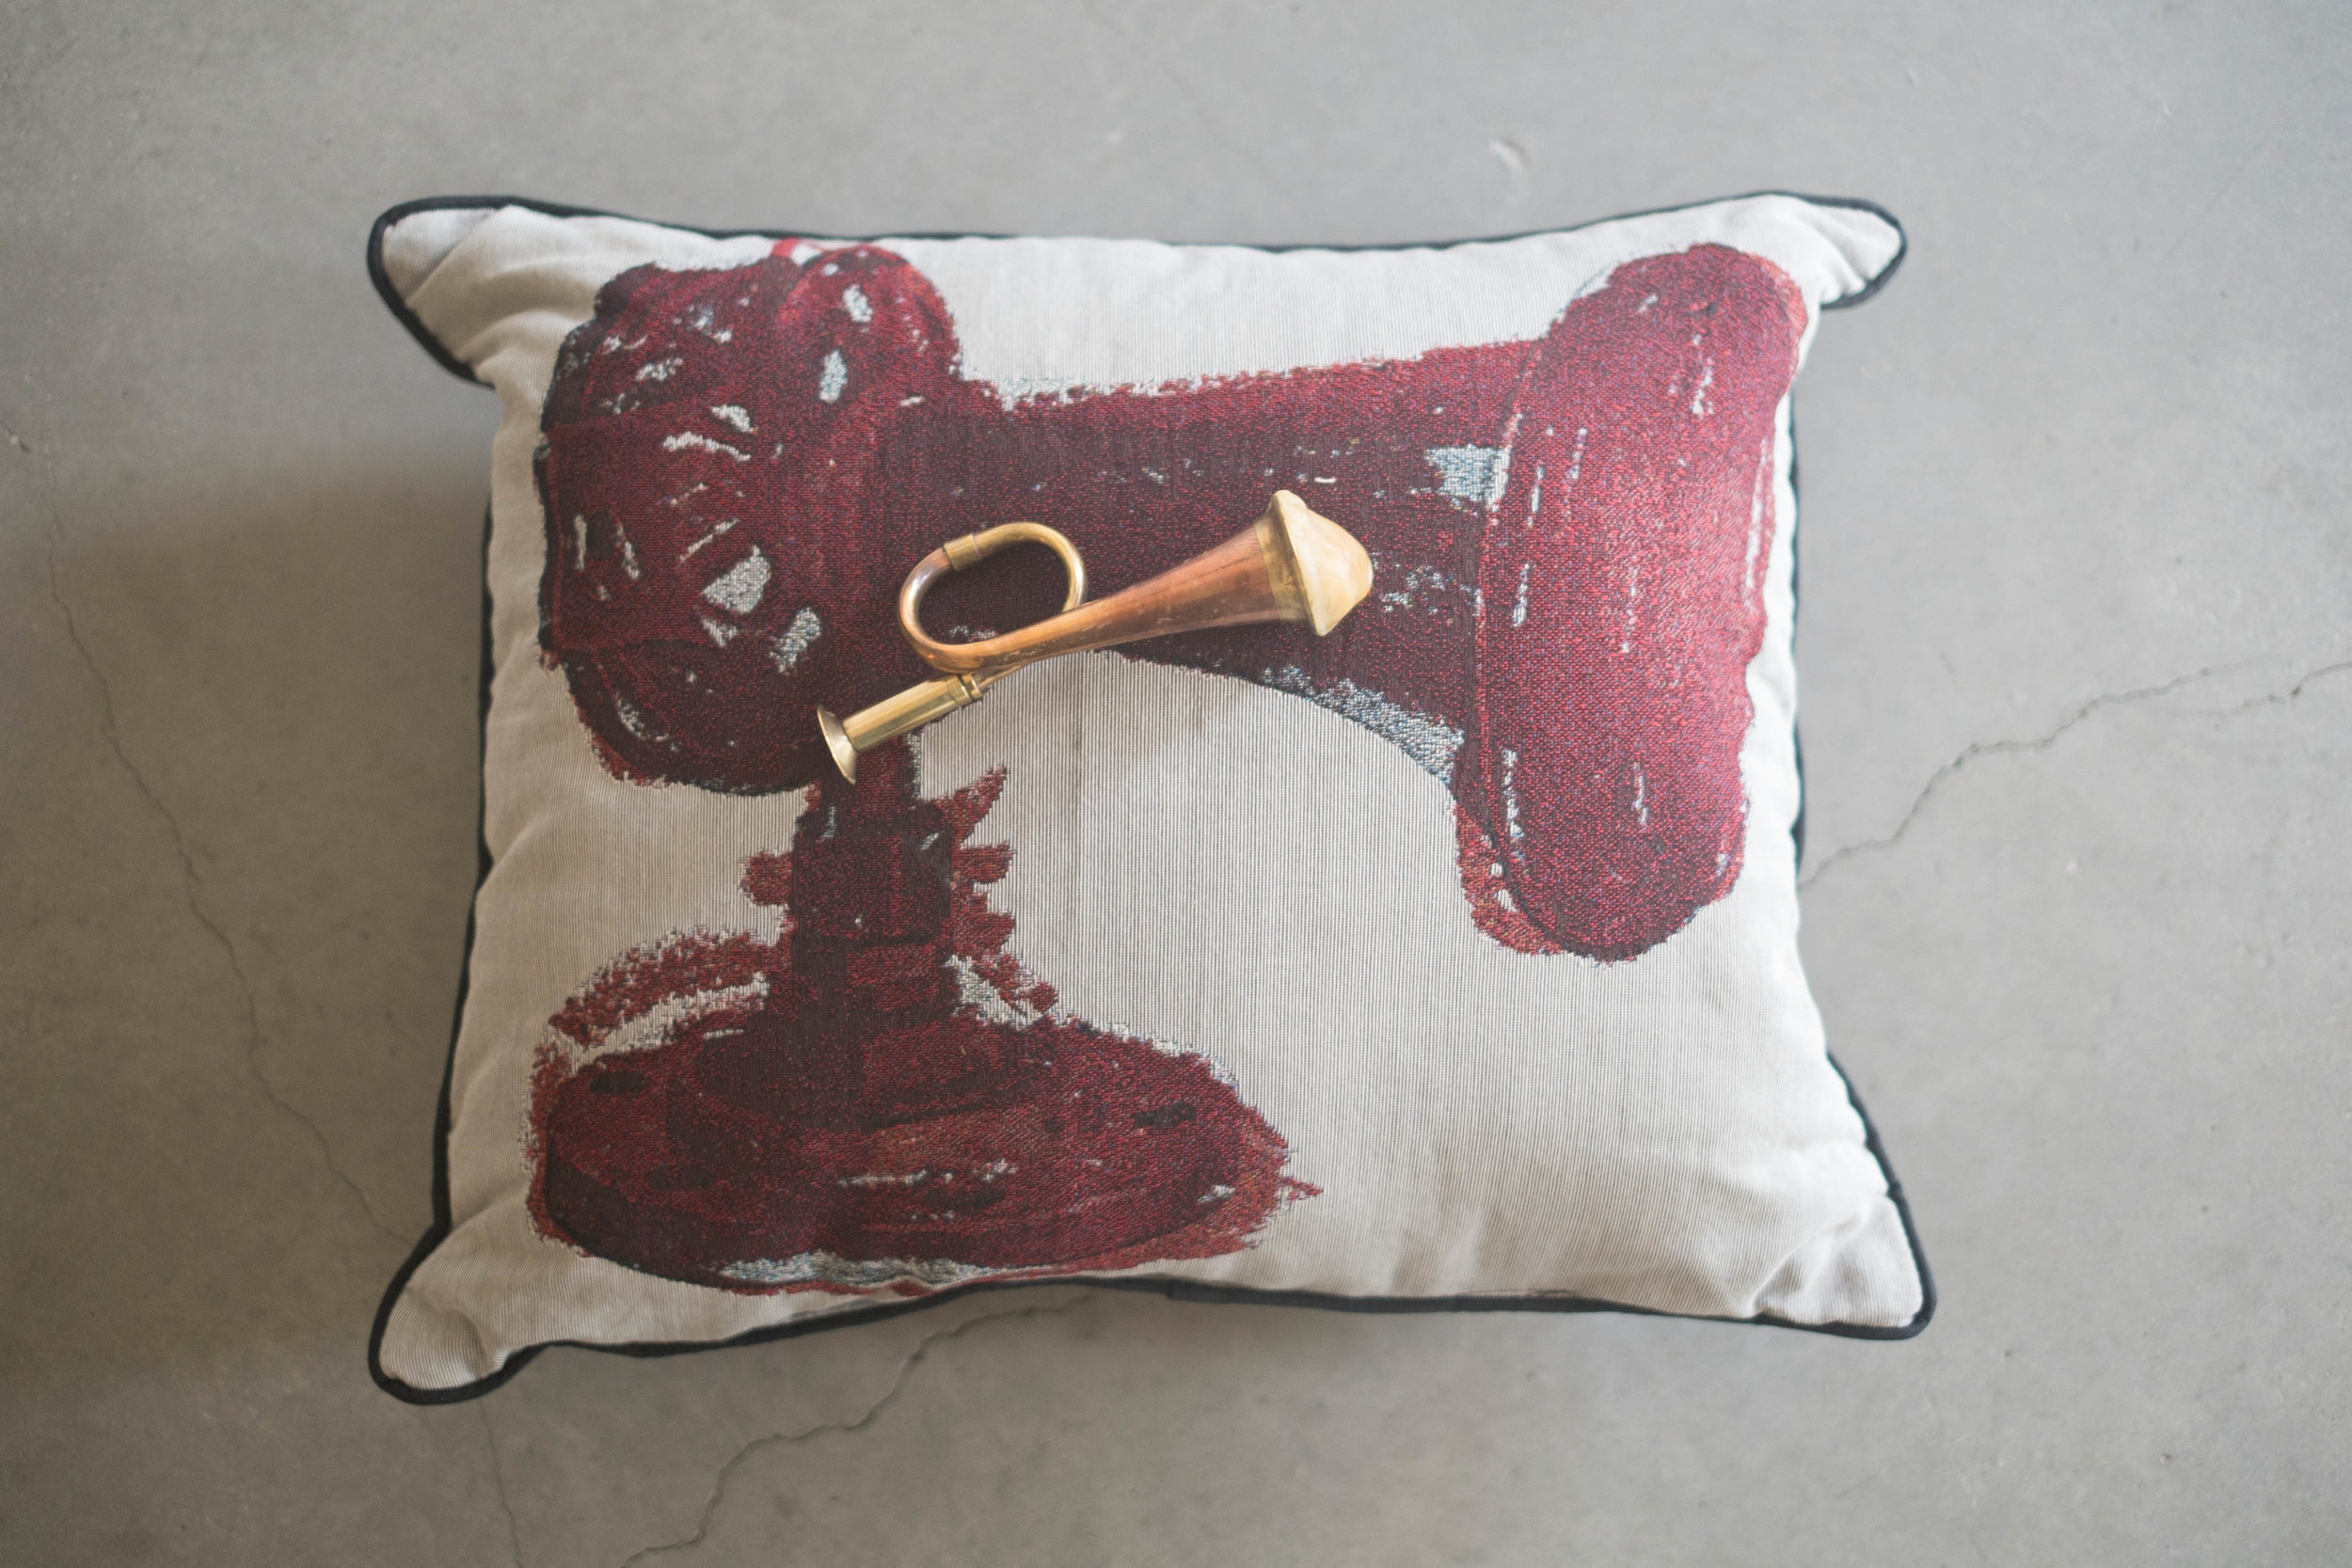   Last Post , 2019, Miniature bugle, cotton Jacquard tapestry pillow, beeswax 